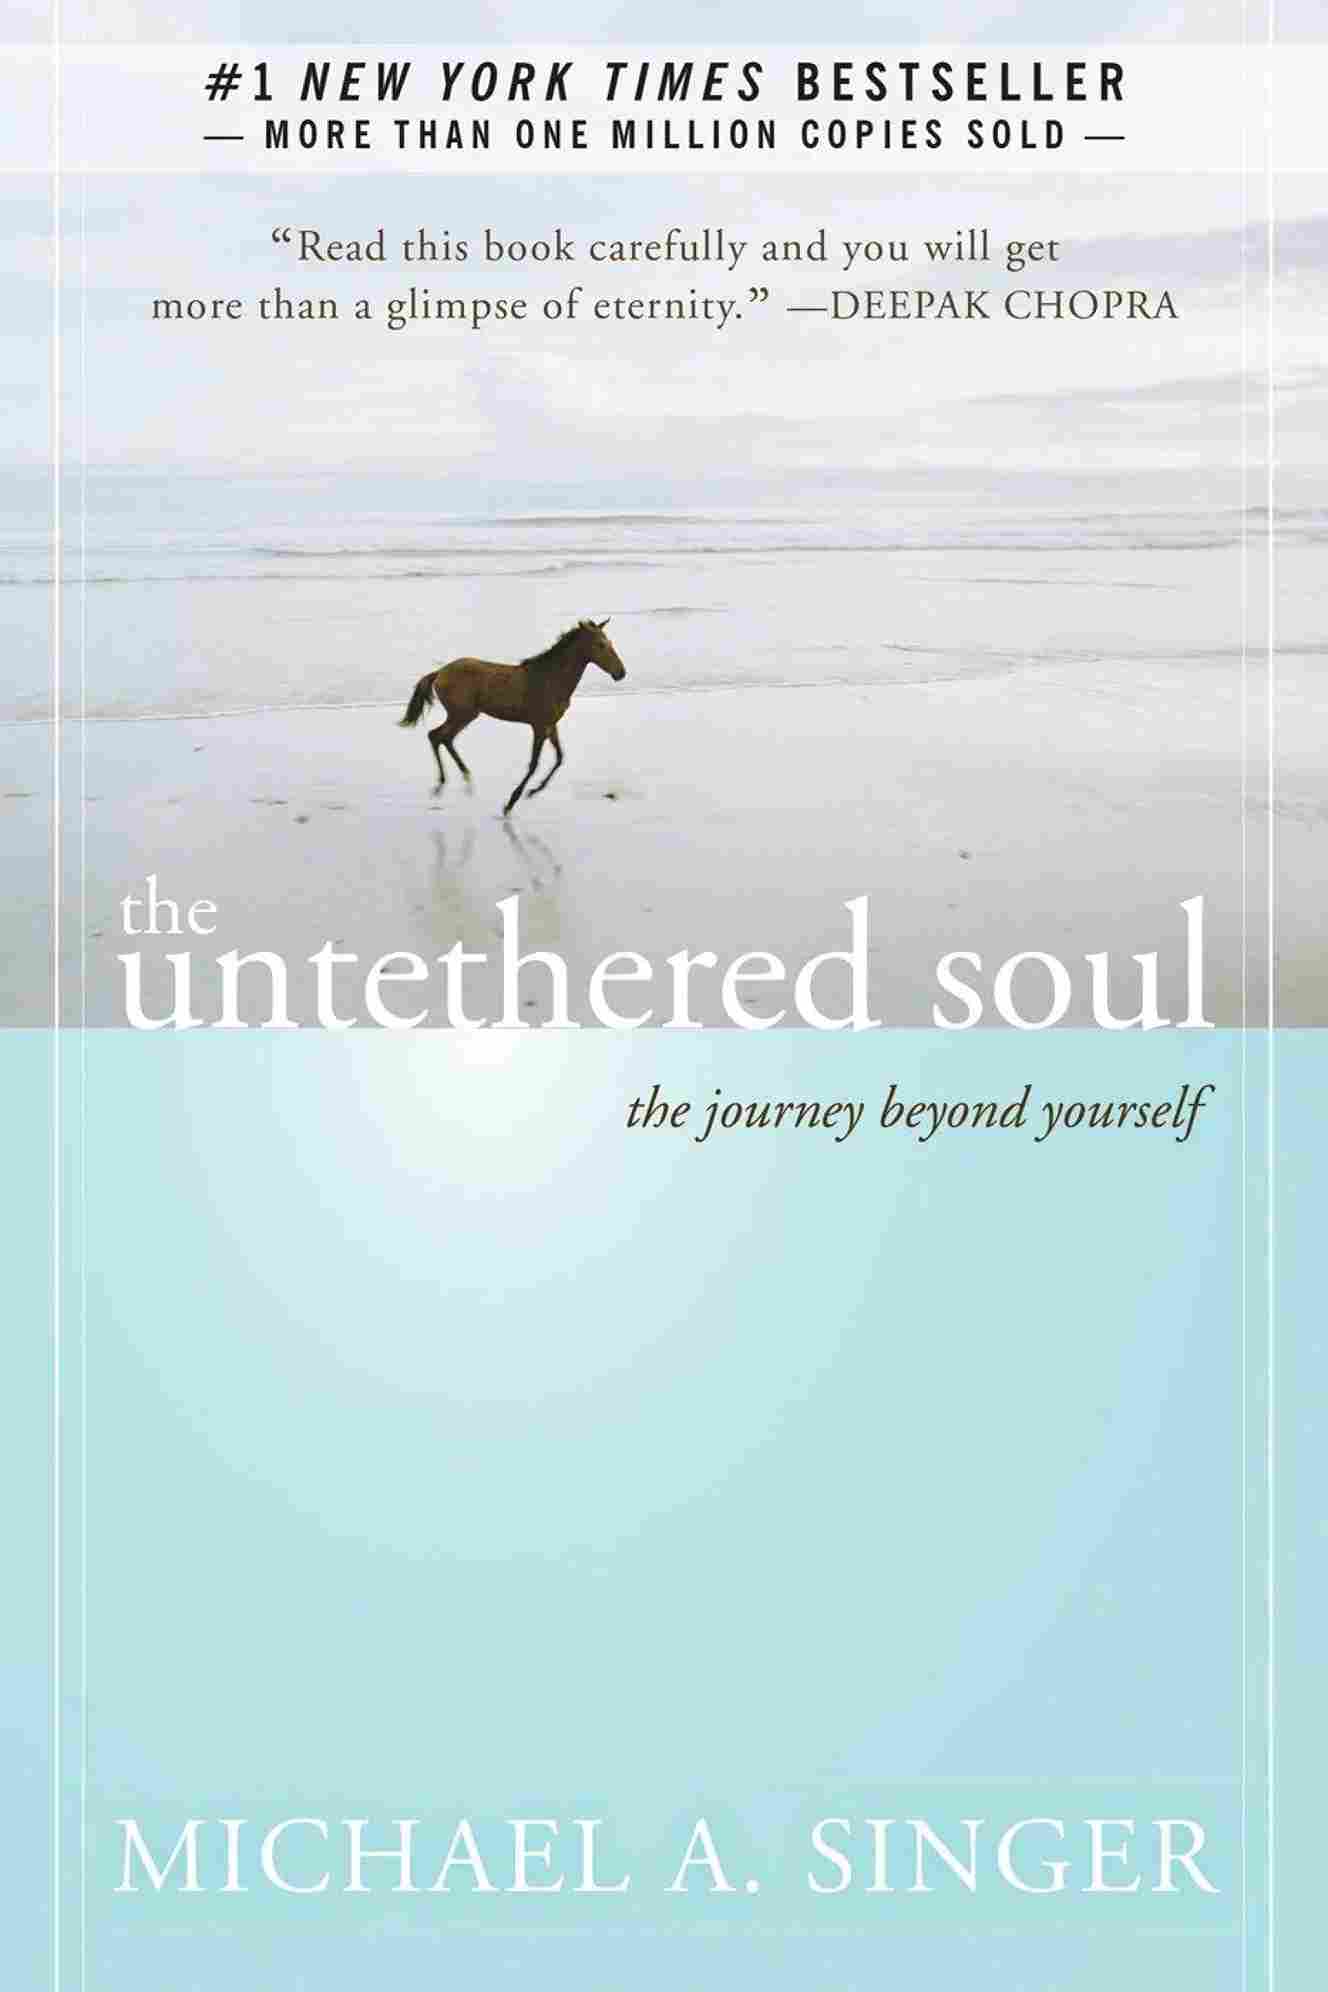 The Untethered Soul: The Journey Beyond Yourself (Paperback) - Michael A. Singer - 99BooksStore